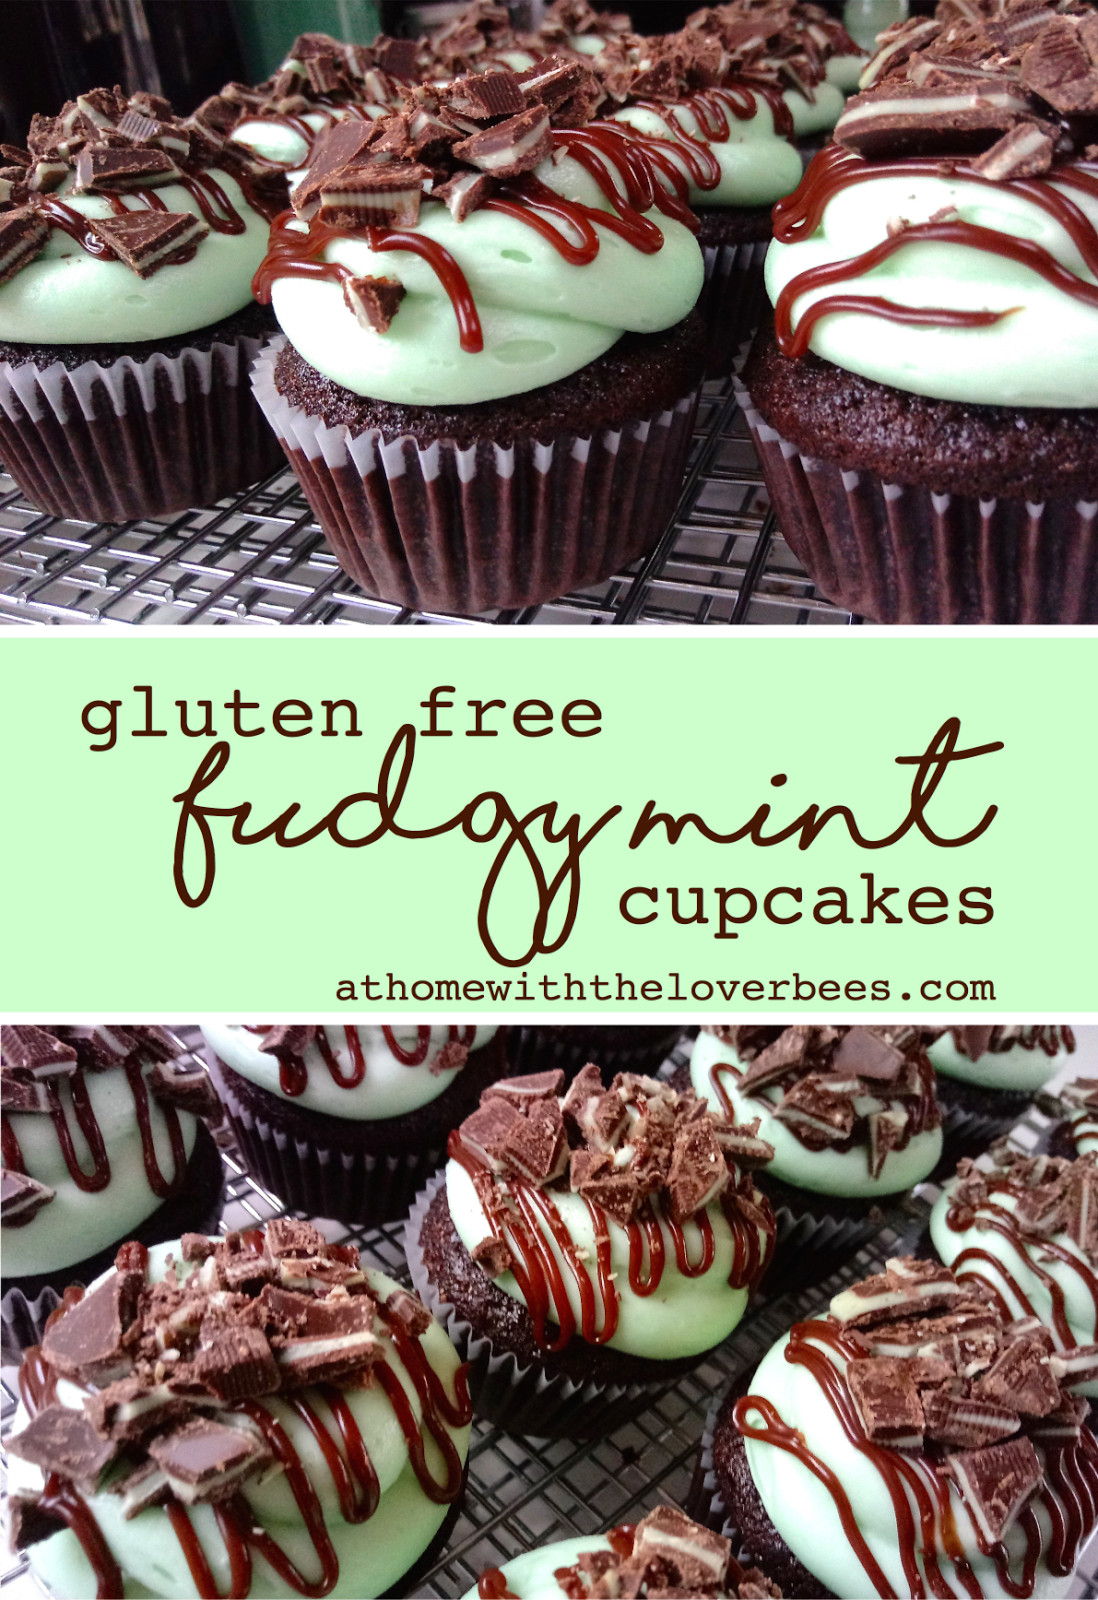 Gourmet Cupcake Recipes Using Cake Mix
 At Home with the Loverbees Easy Gourmet Cupcakes Gluten